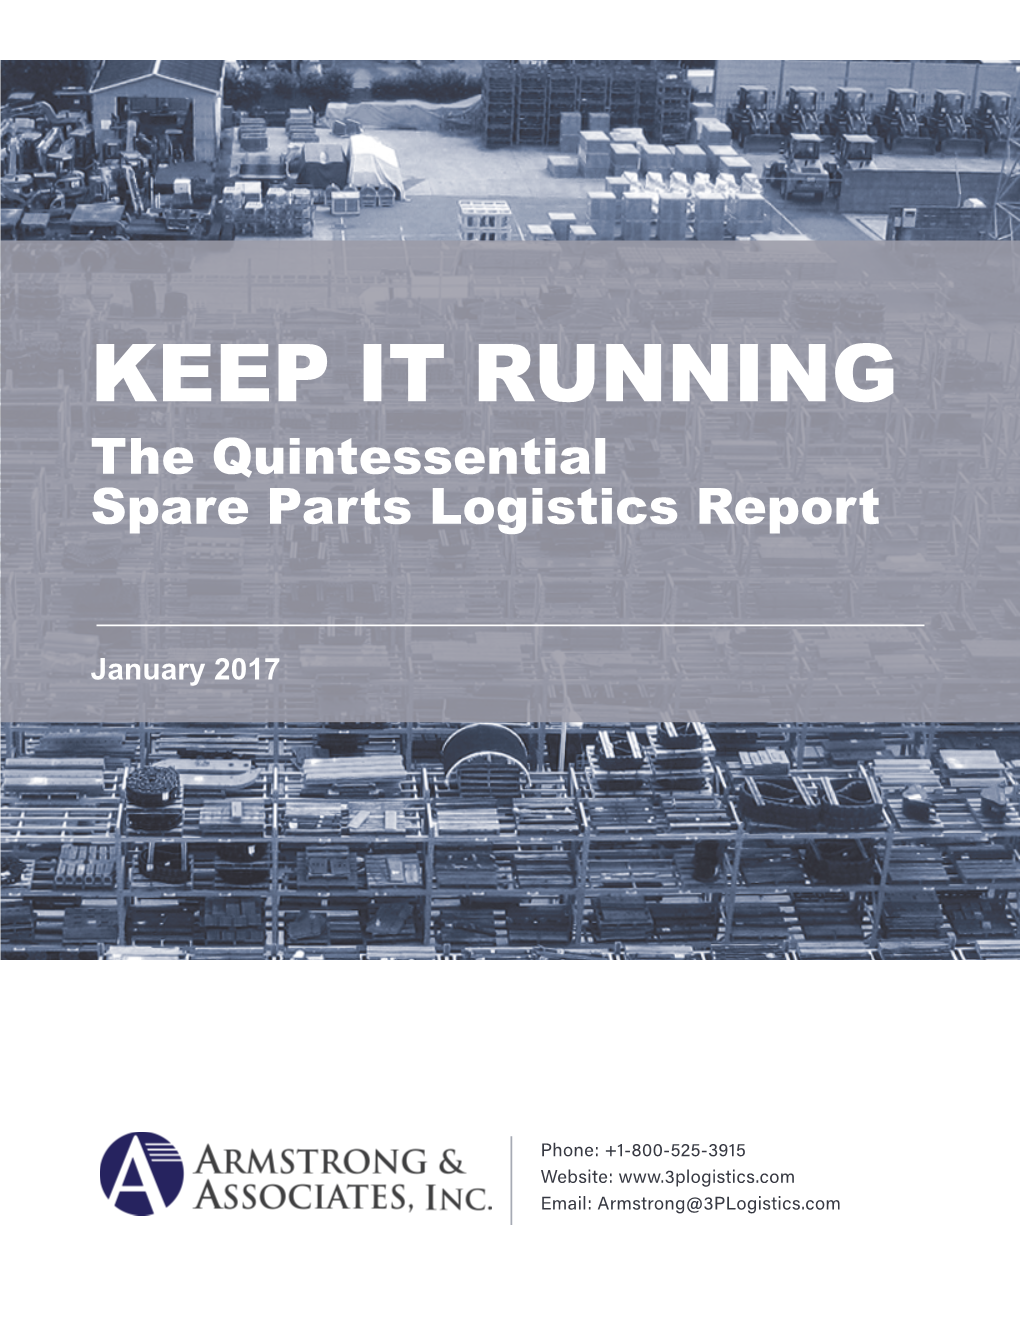 KEEP IT RUNNING the Quintessential Spare Parts Logistics Report